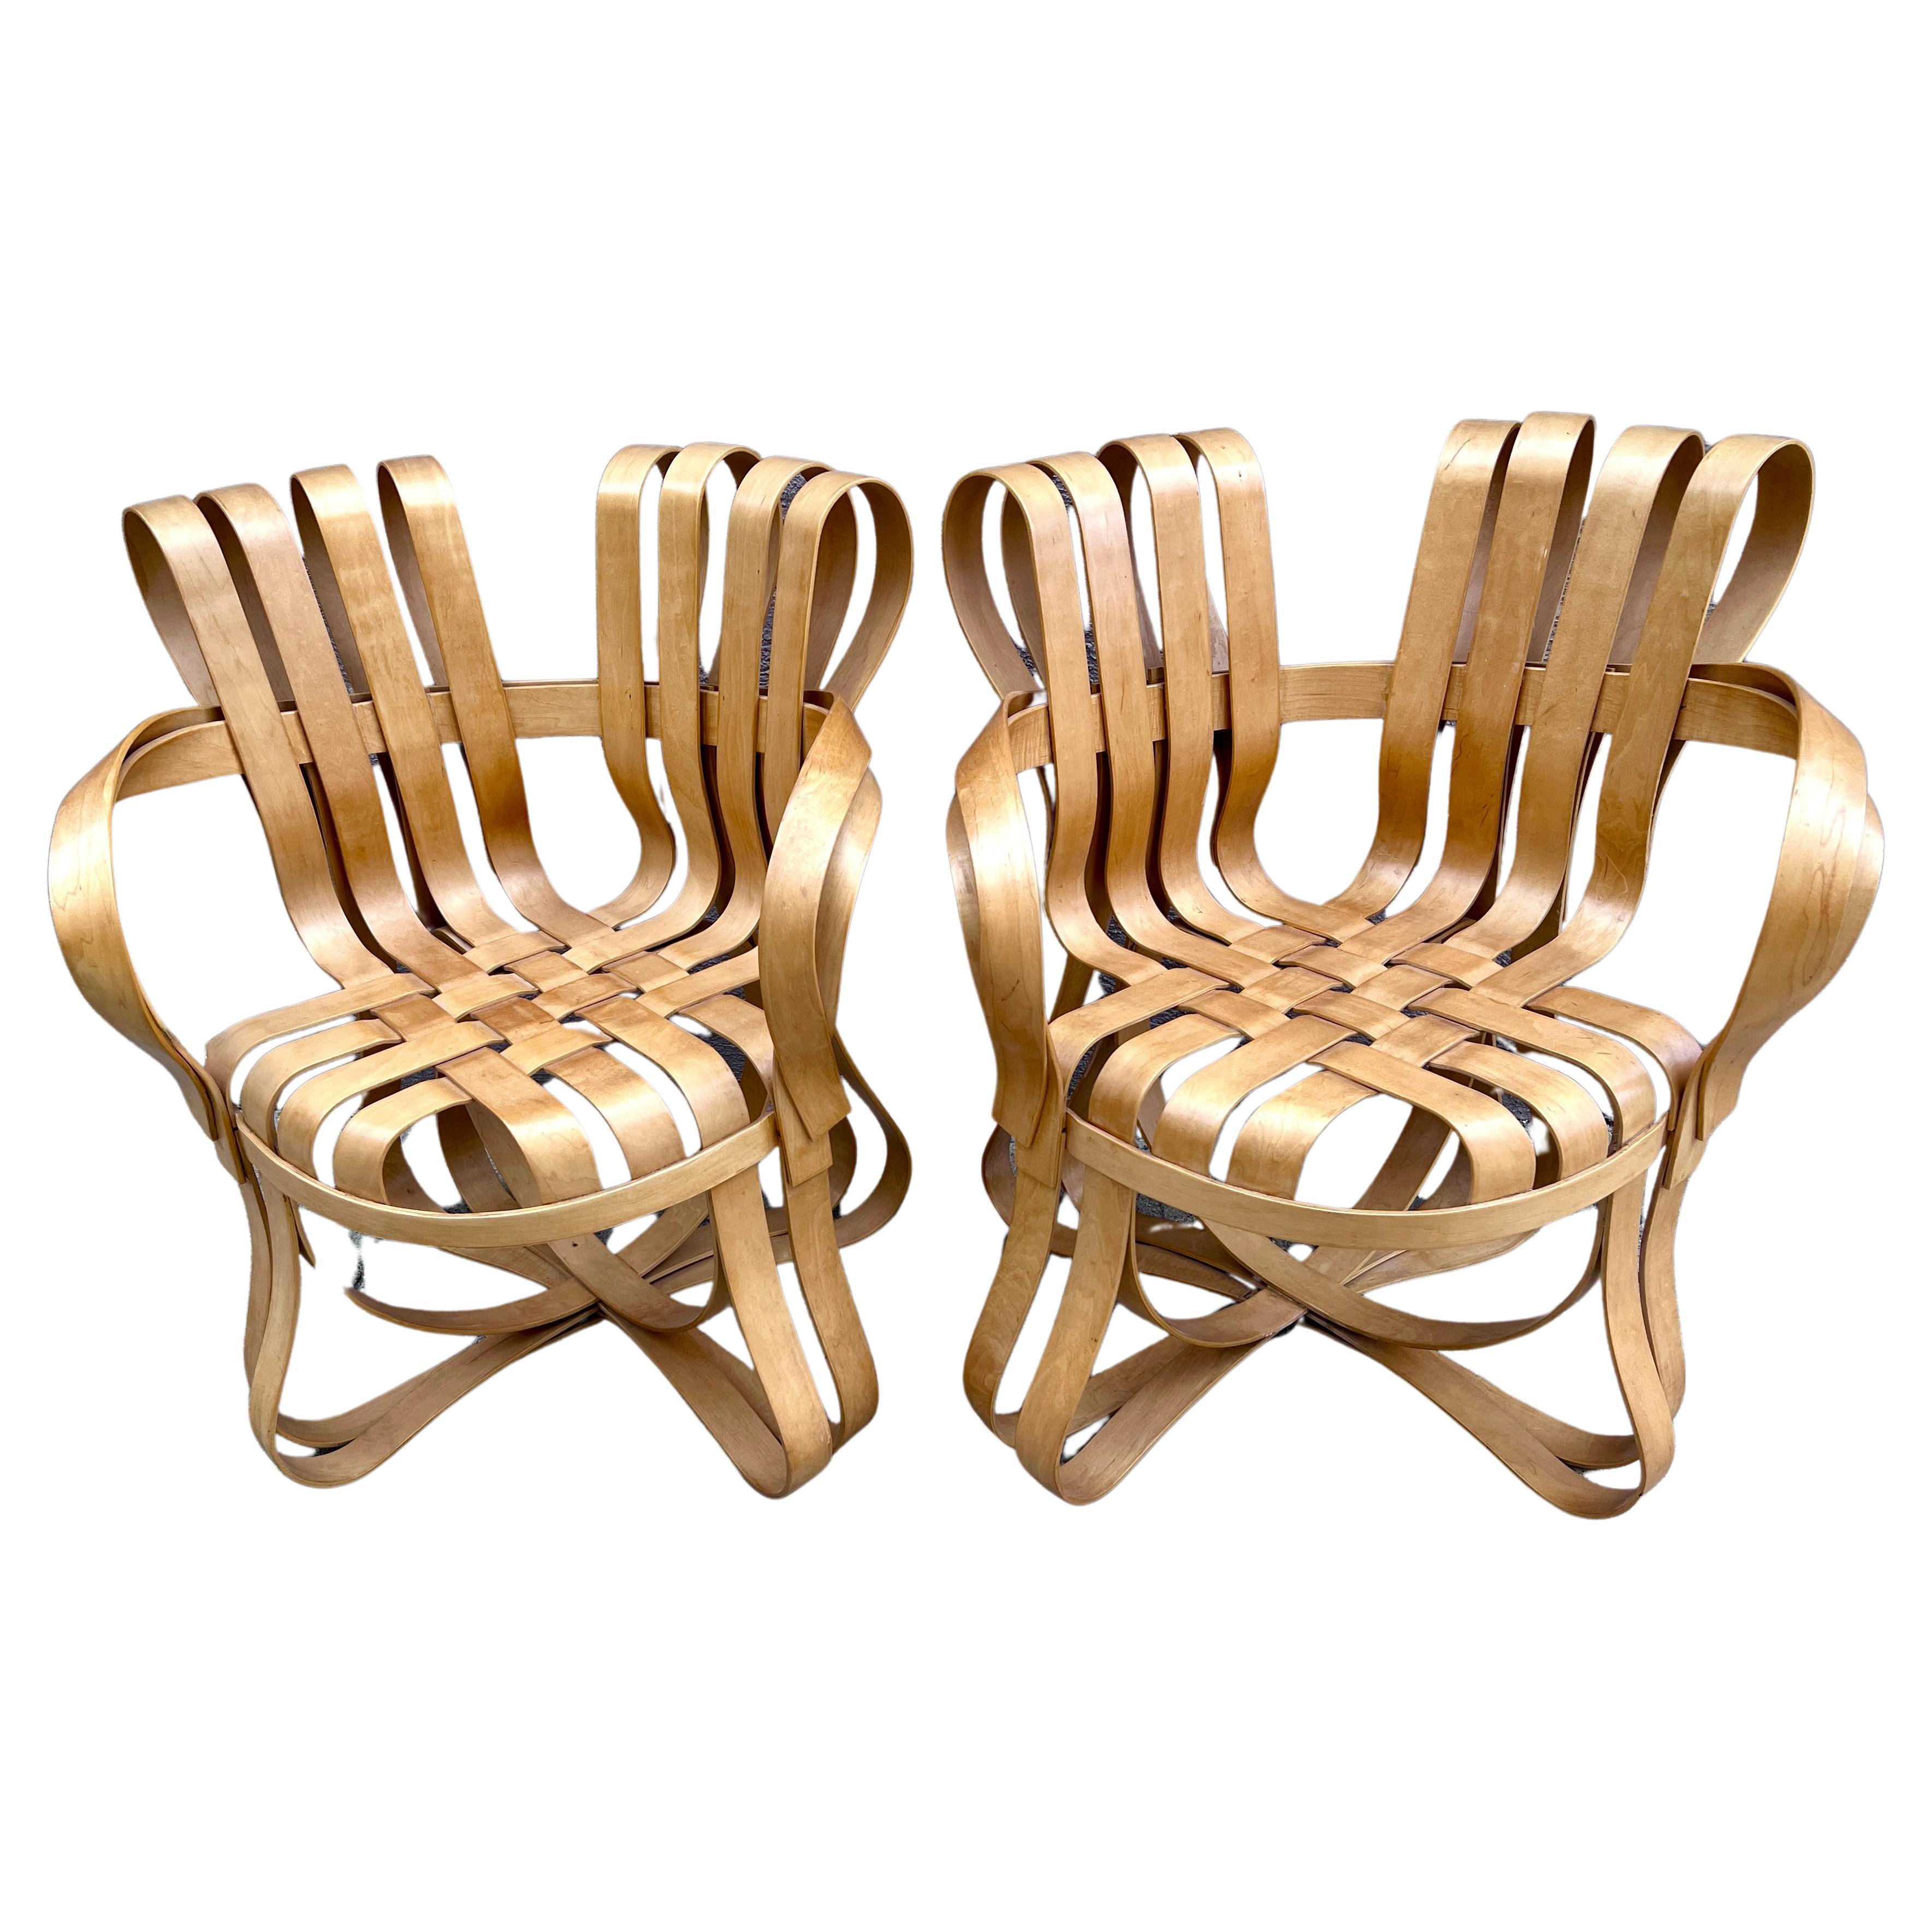 Pair Frank Gehry Cross Check Bent Maple Chairs For Knoll For Sale 12